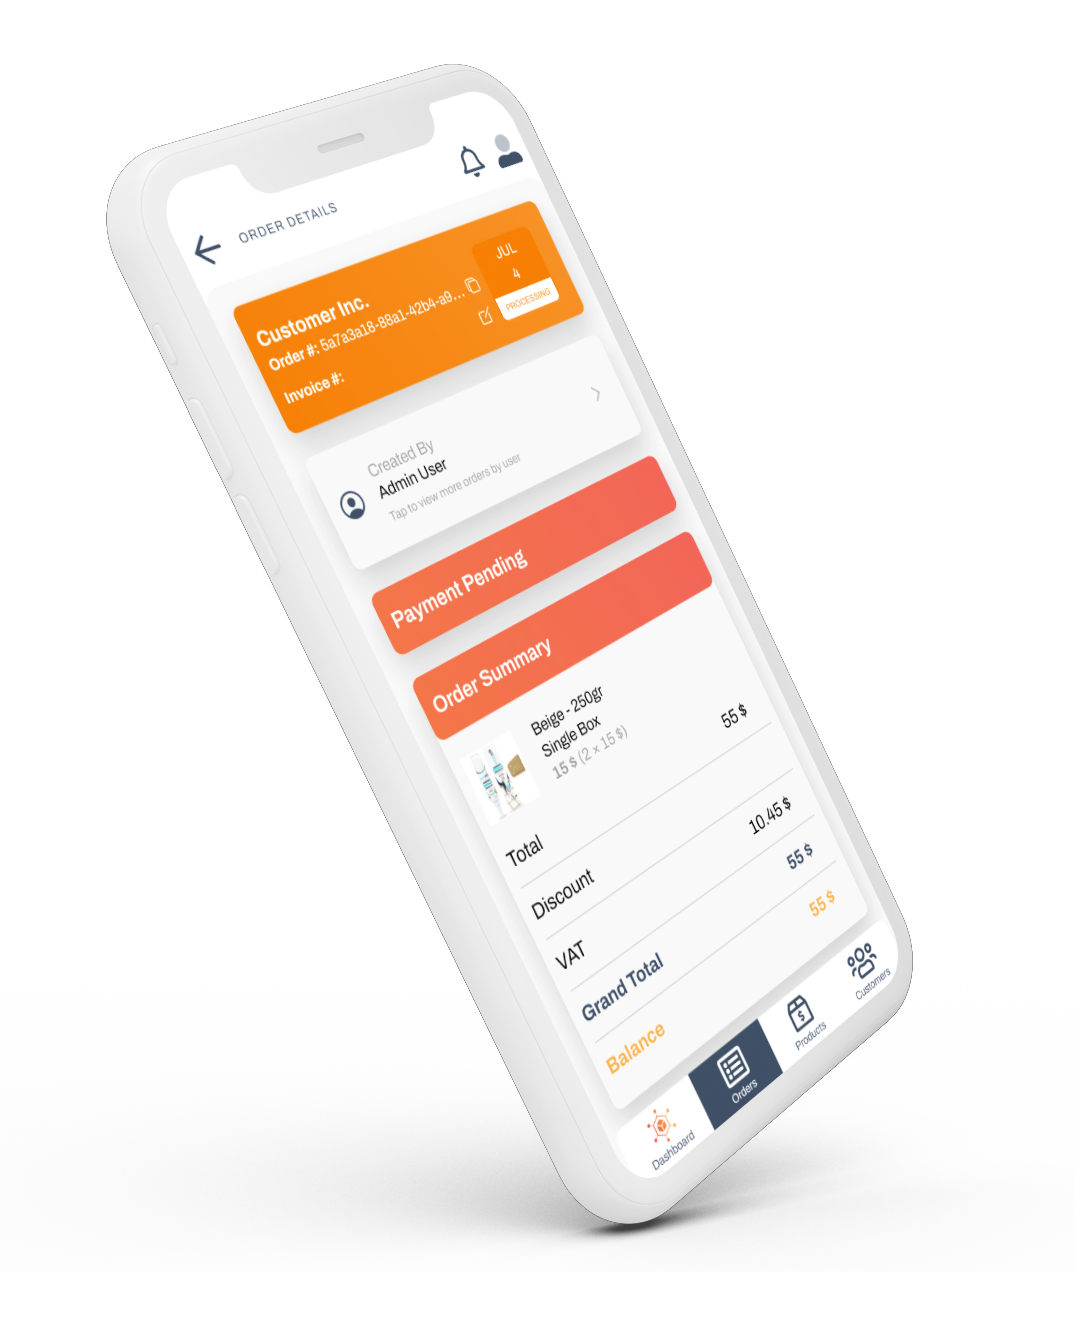 Intuitive UI with clear order details helping clients and employees with their daily tasks